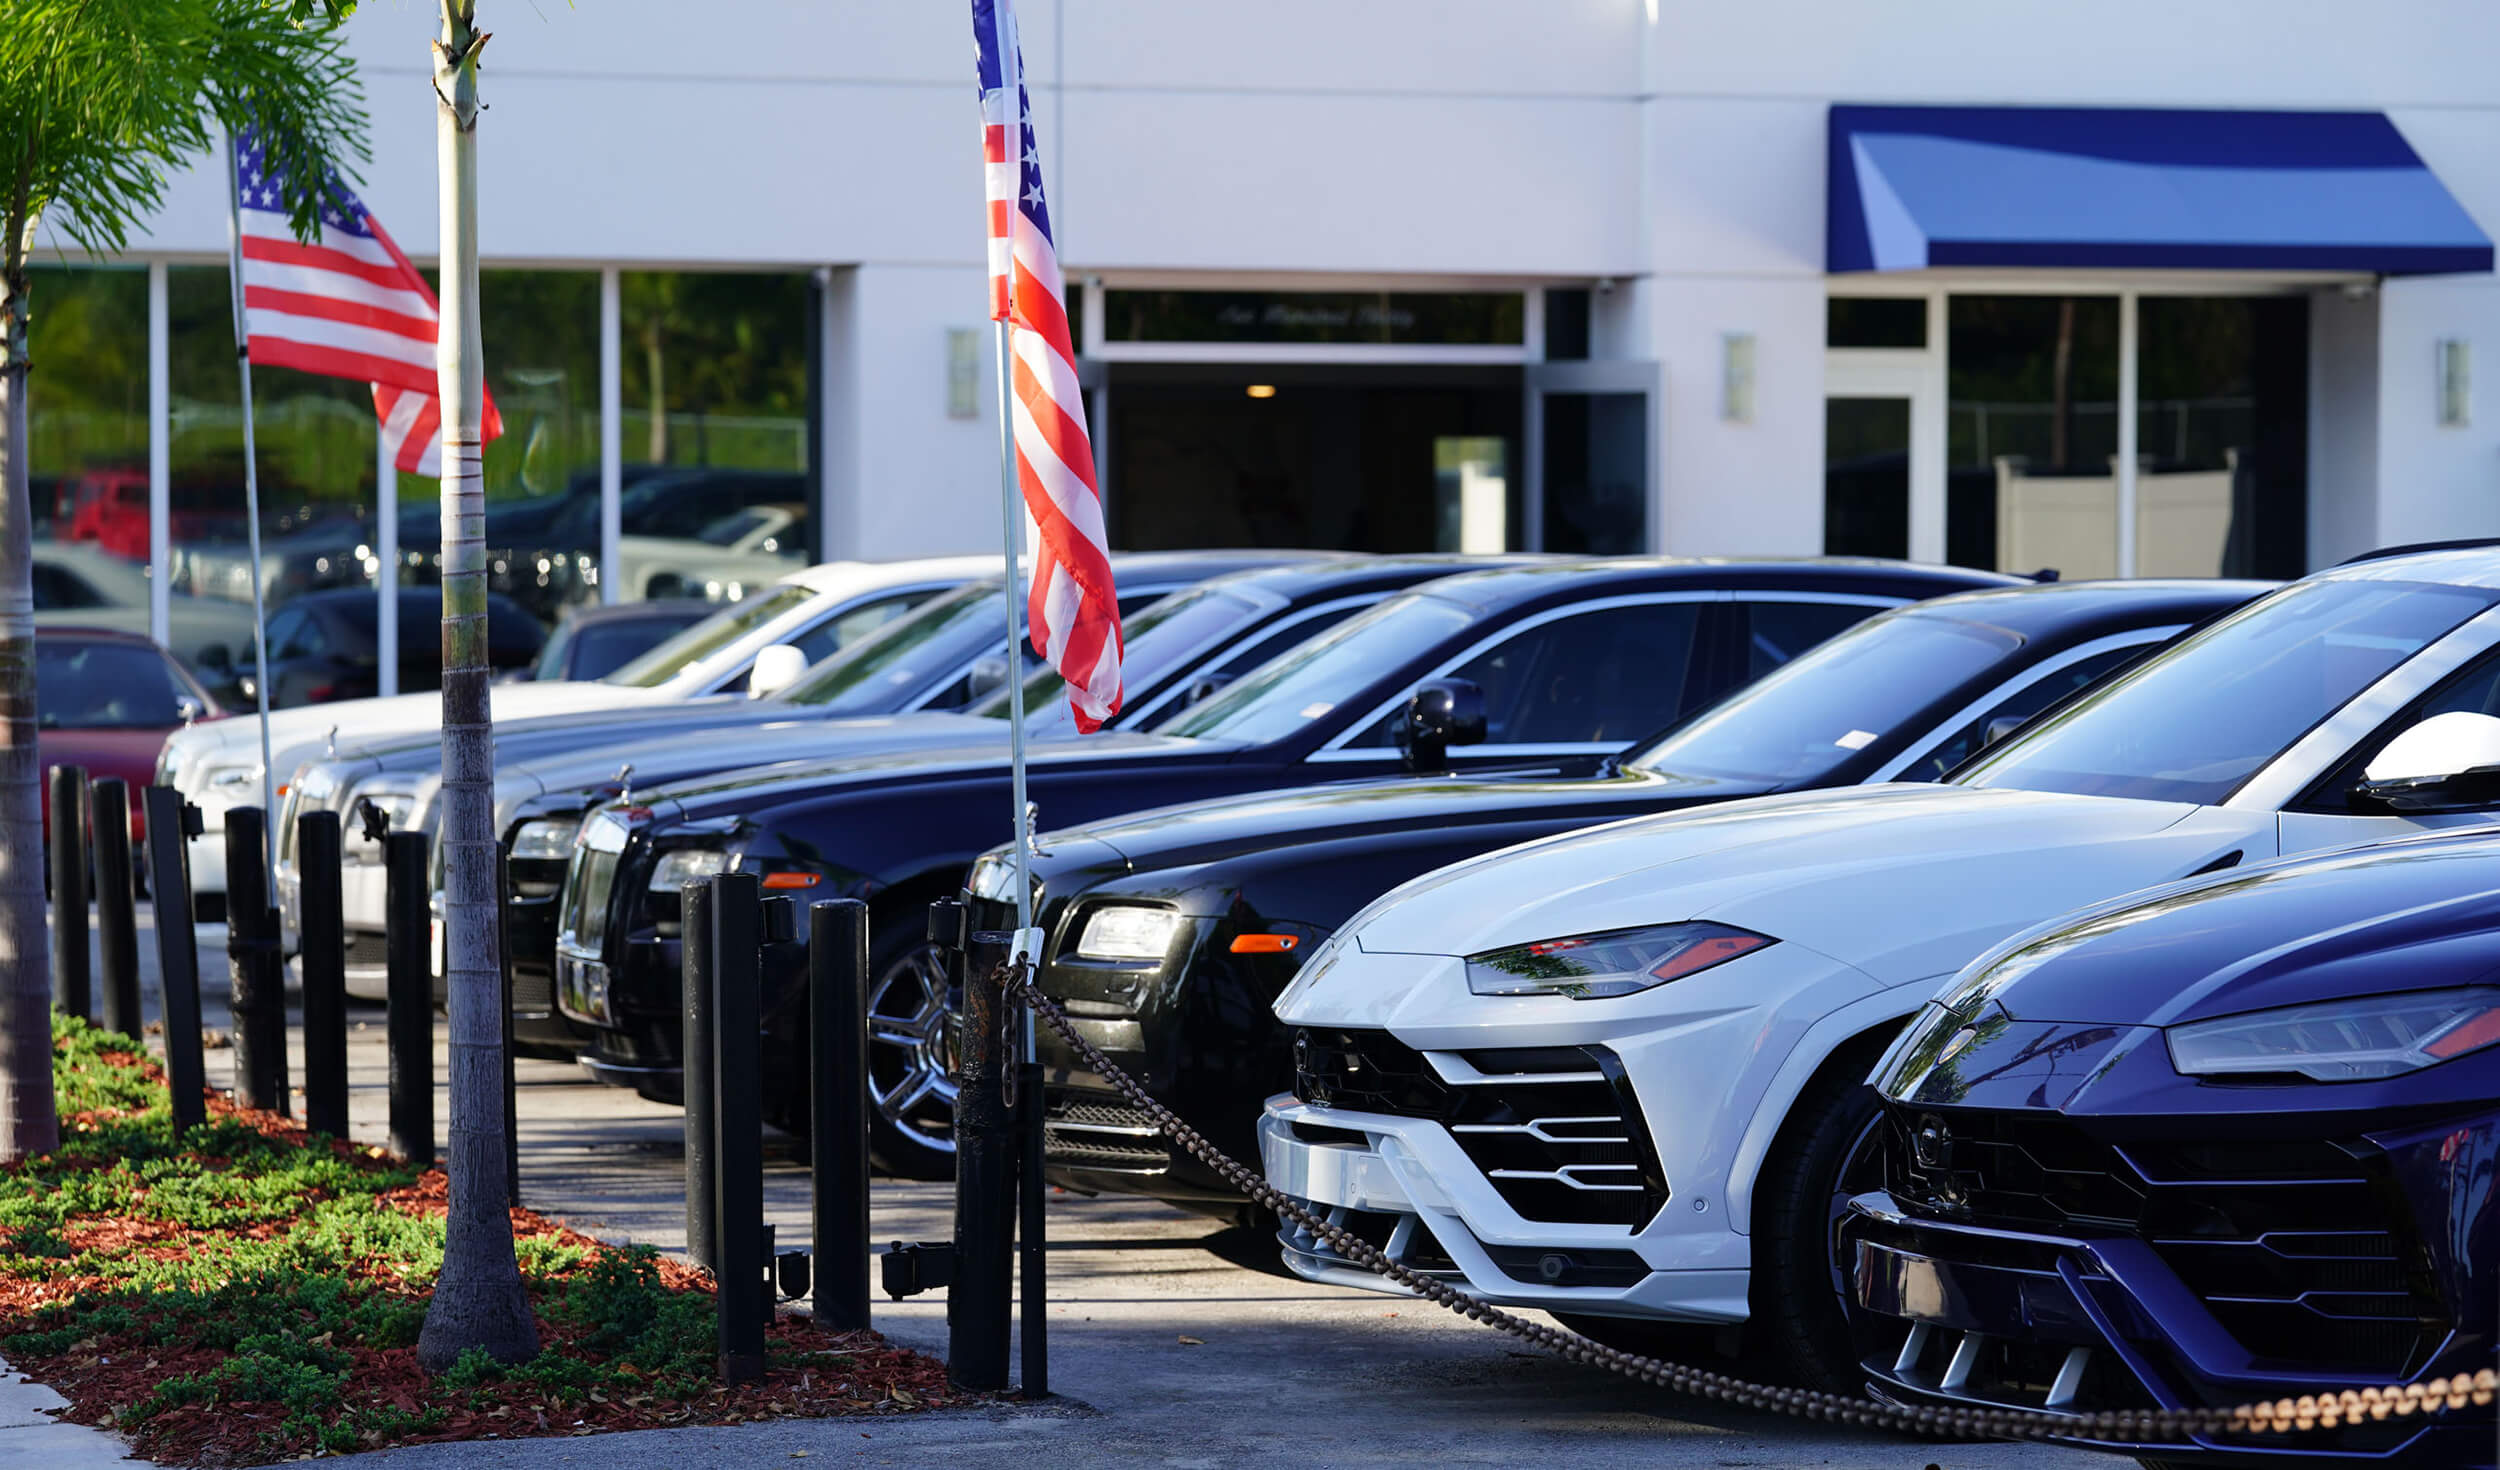 Exterior image of Palm Beach Auto Group dealership: flags, cars, front of the store.